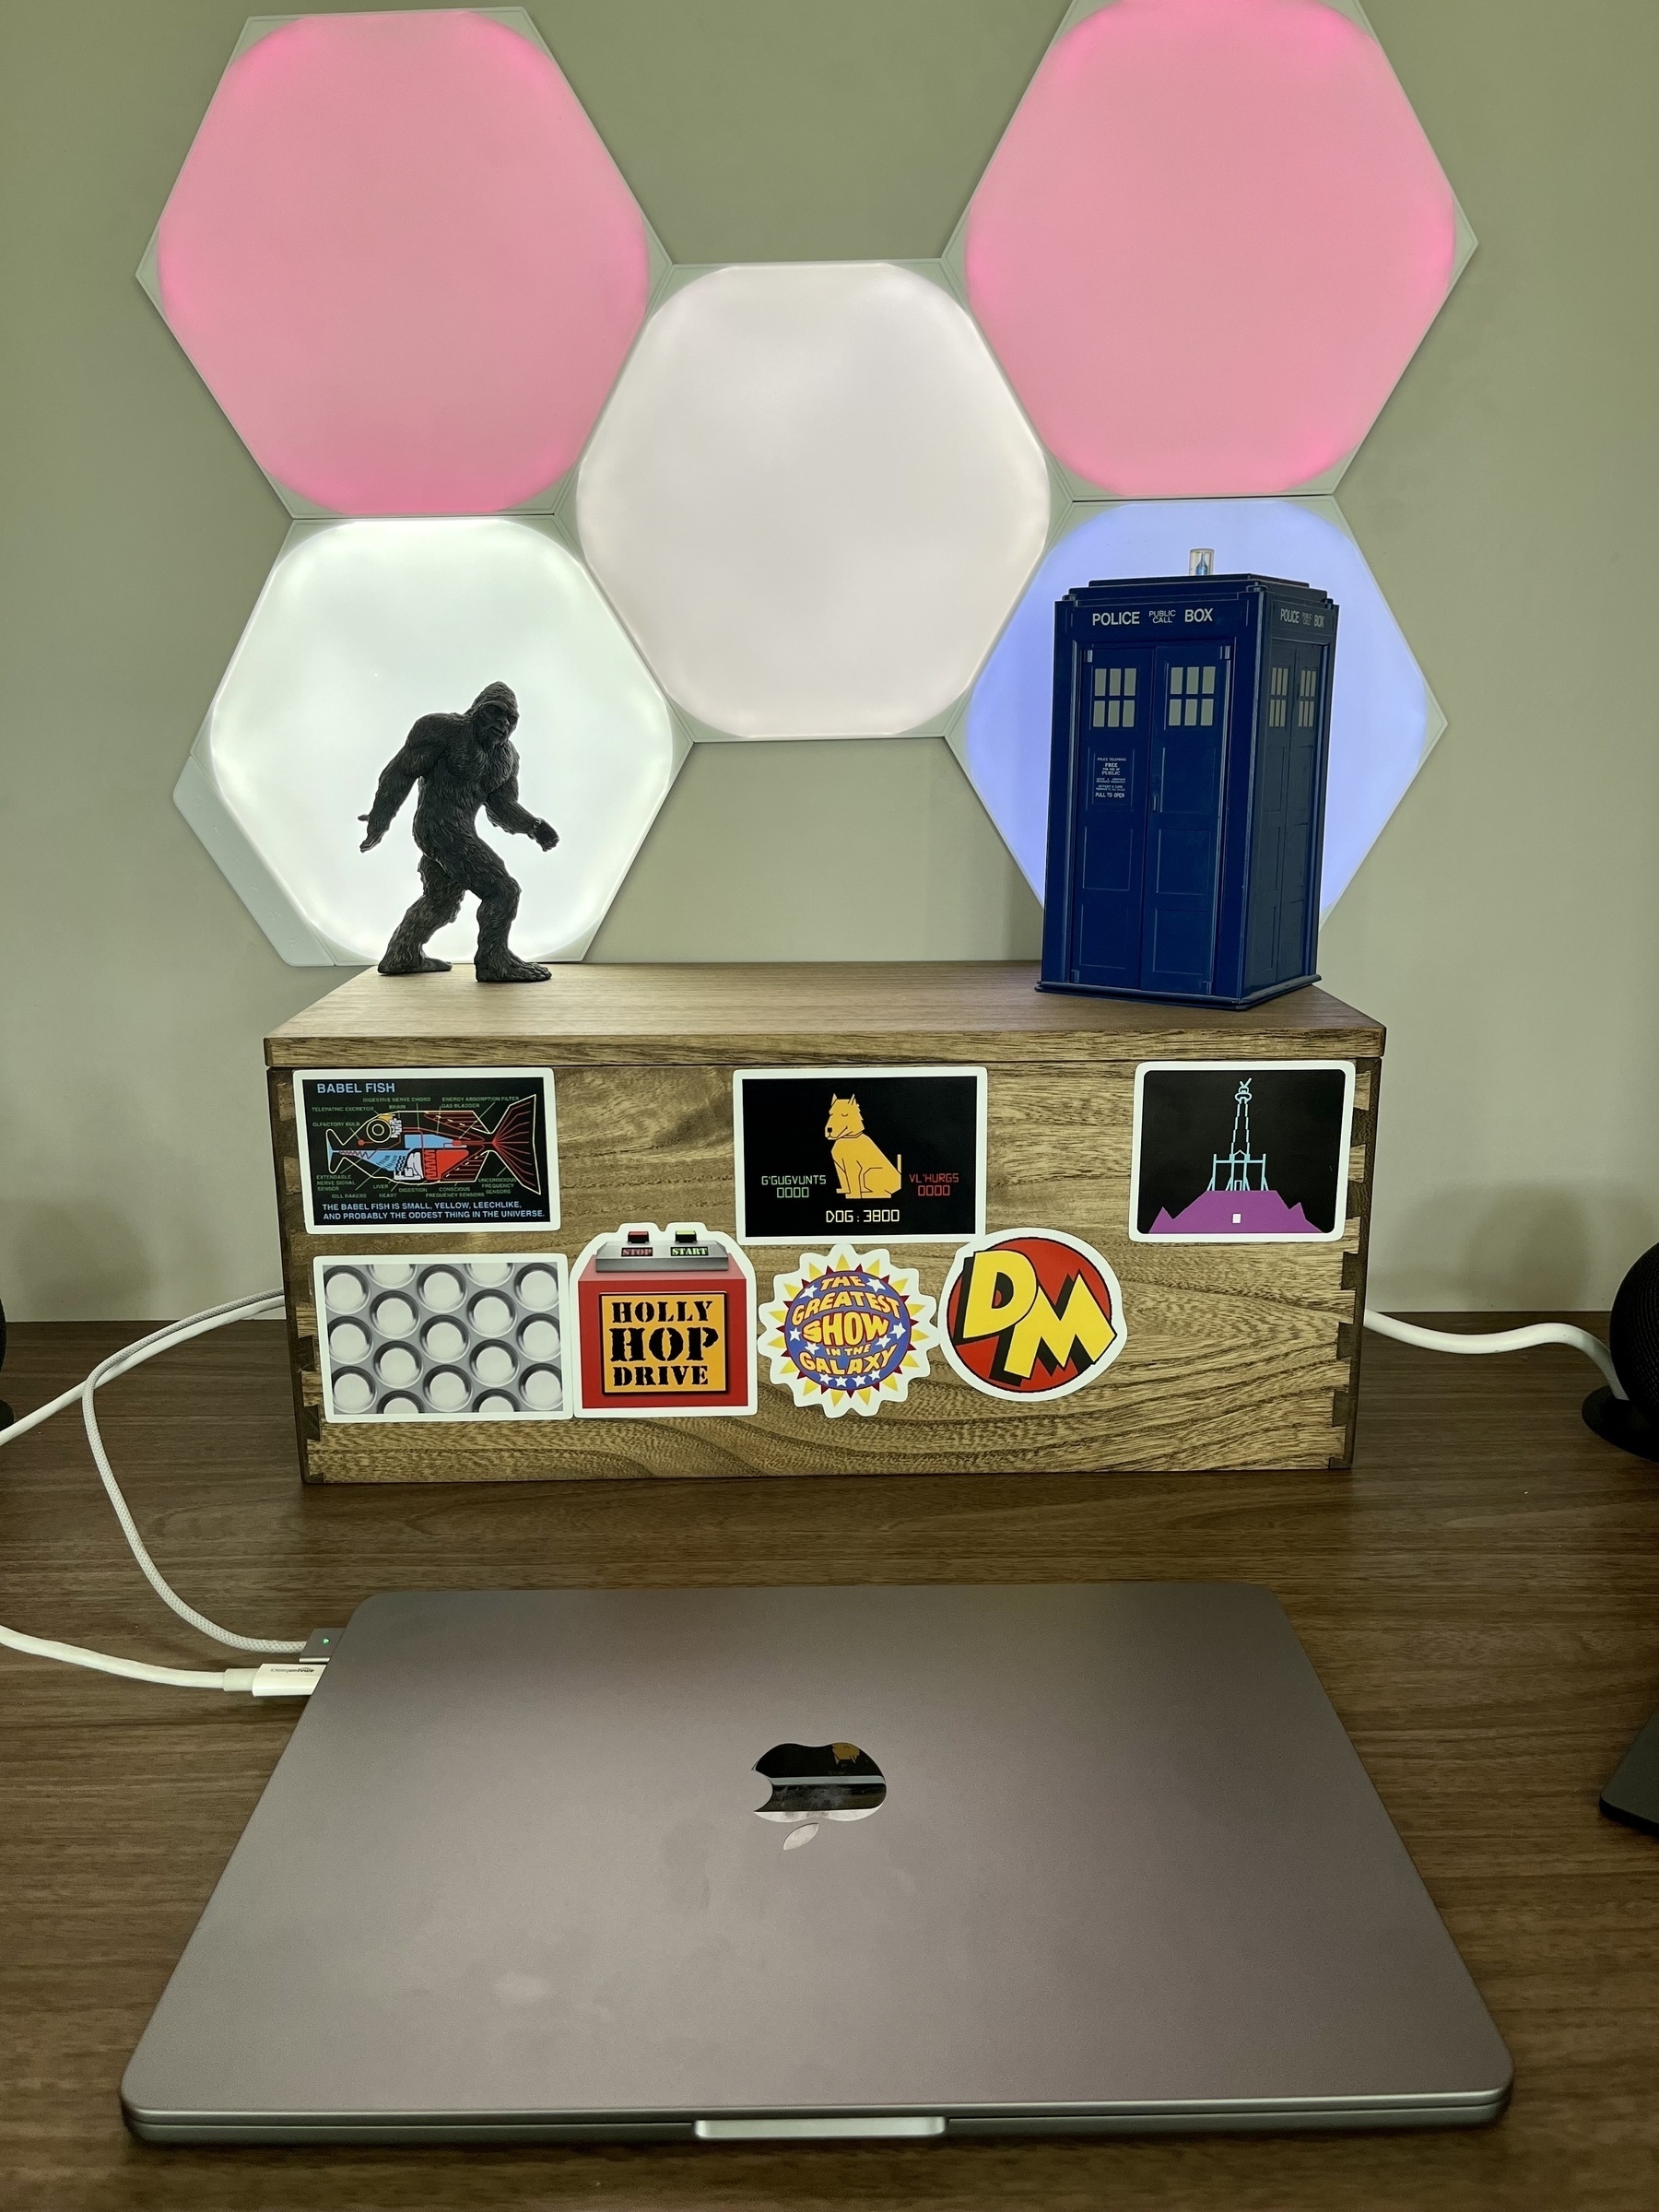 Various geeky stickers, from Doctor Who, to Hitchhiker’s Guide, Red Dwarf and DangerMouse adorn a box. The Tardis and a sasquatch sit on top of the box.